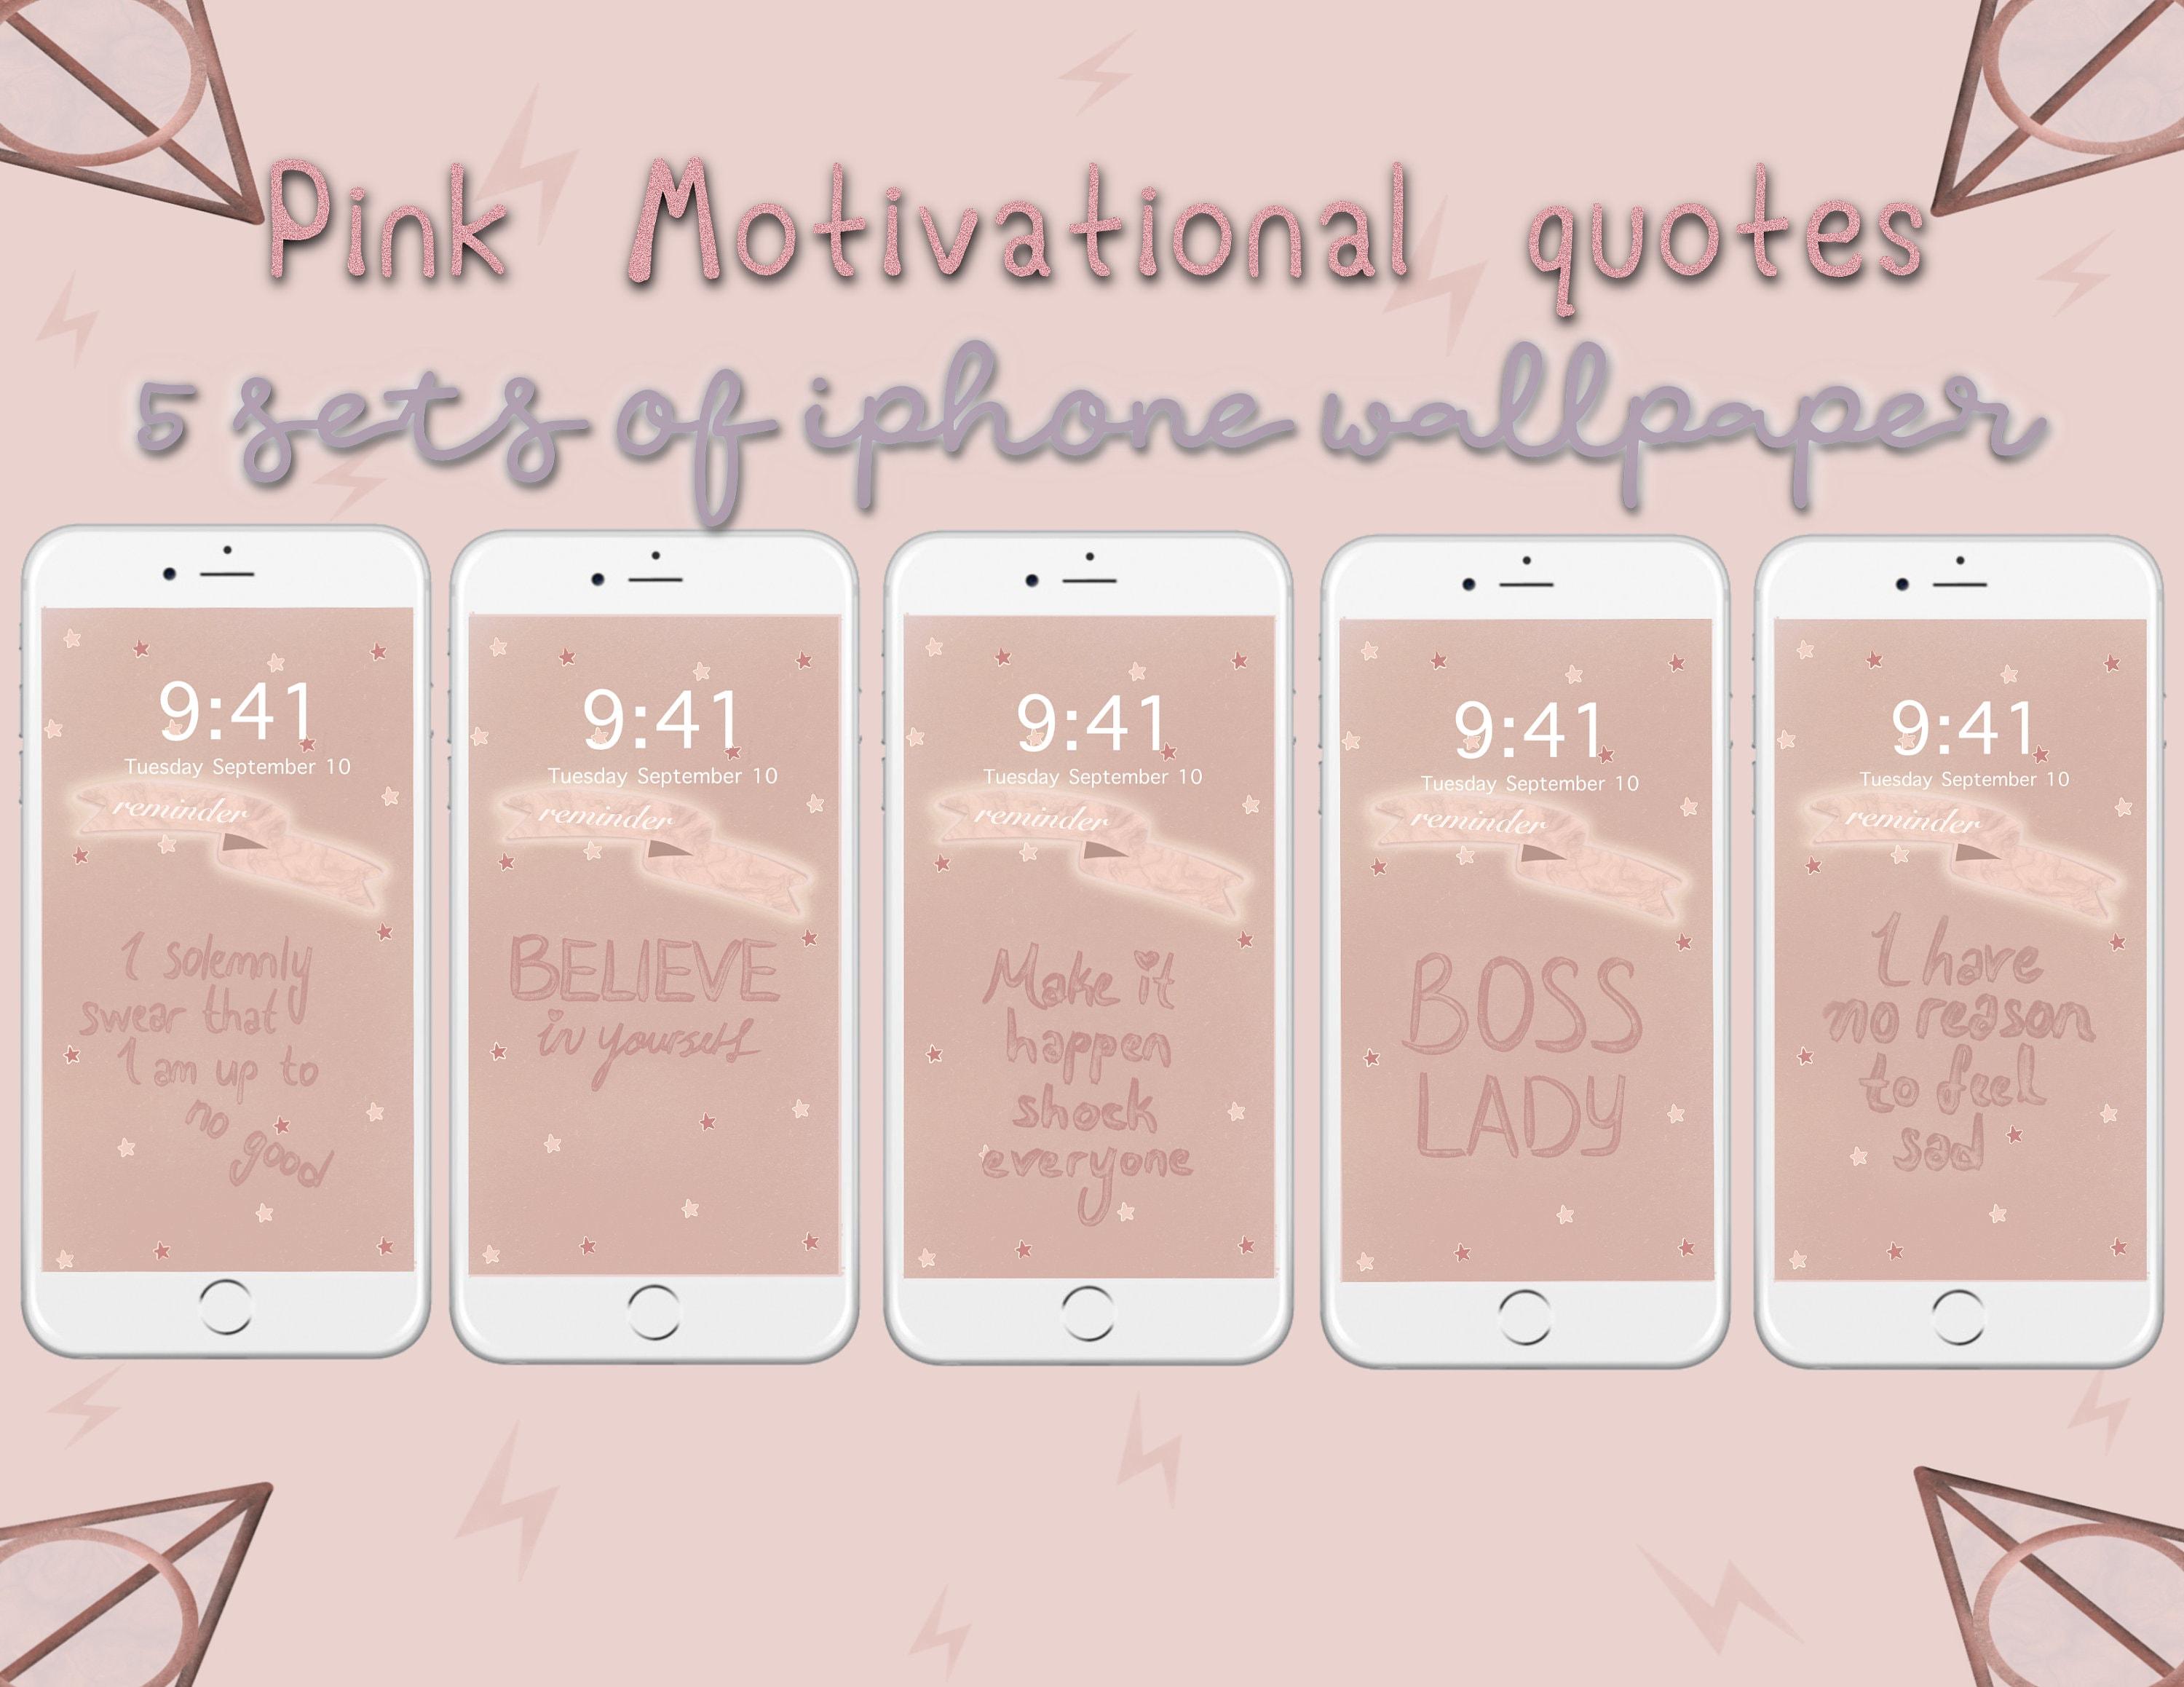 5 Sets of Aesthetic Pink Motivational Quotes Iphone Wallpaper   Etsy